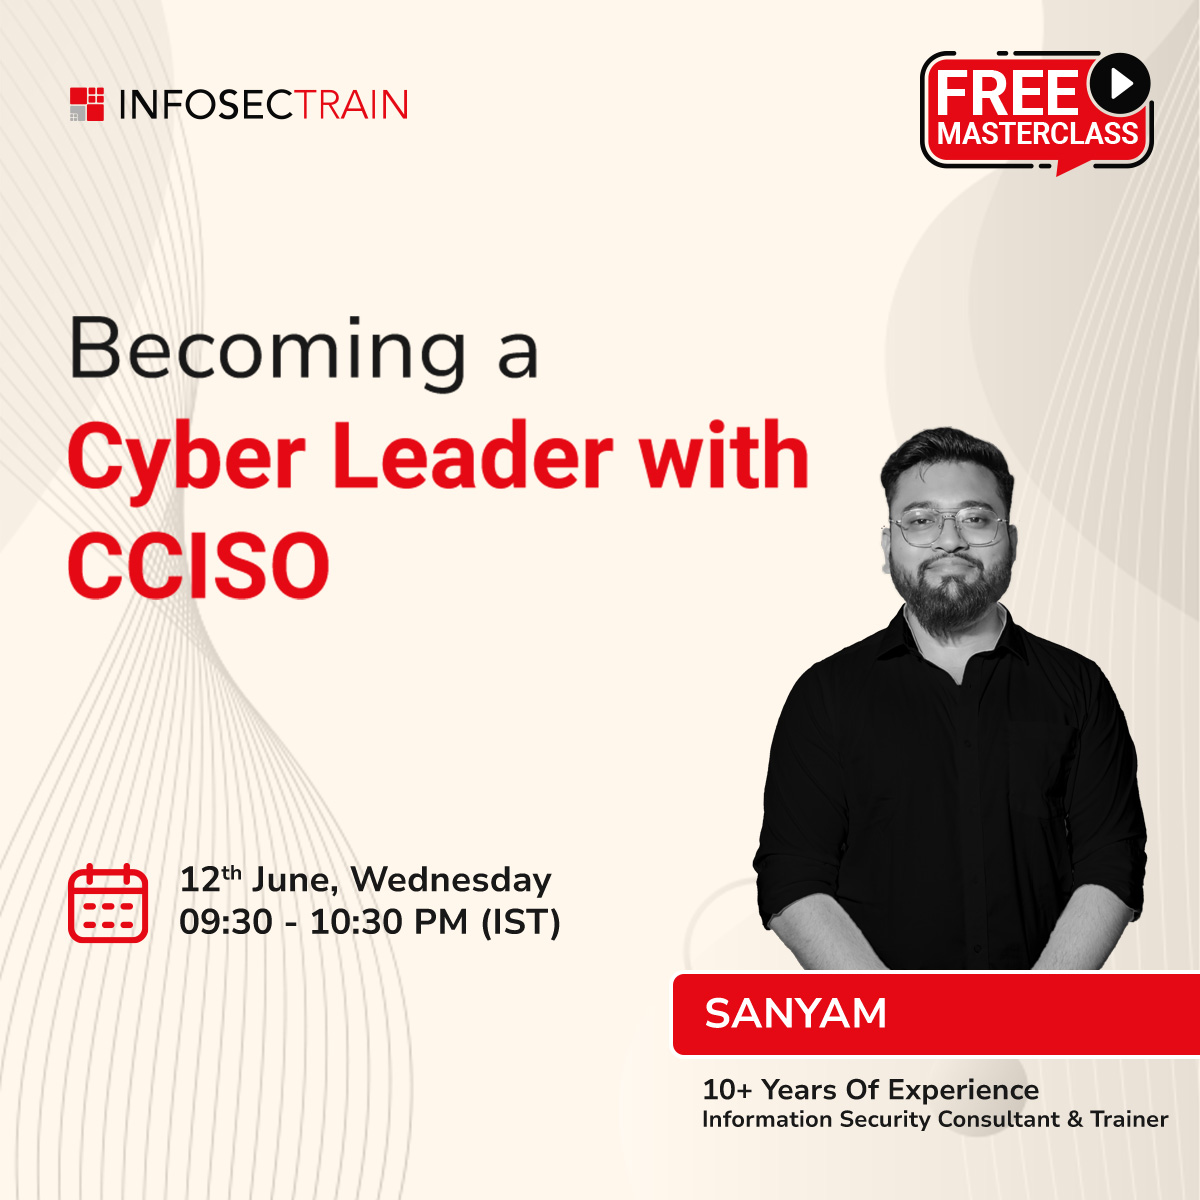 Becoming a Cyber Leader with CCISO, Online Event